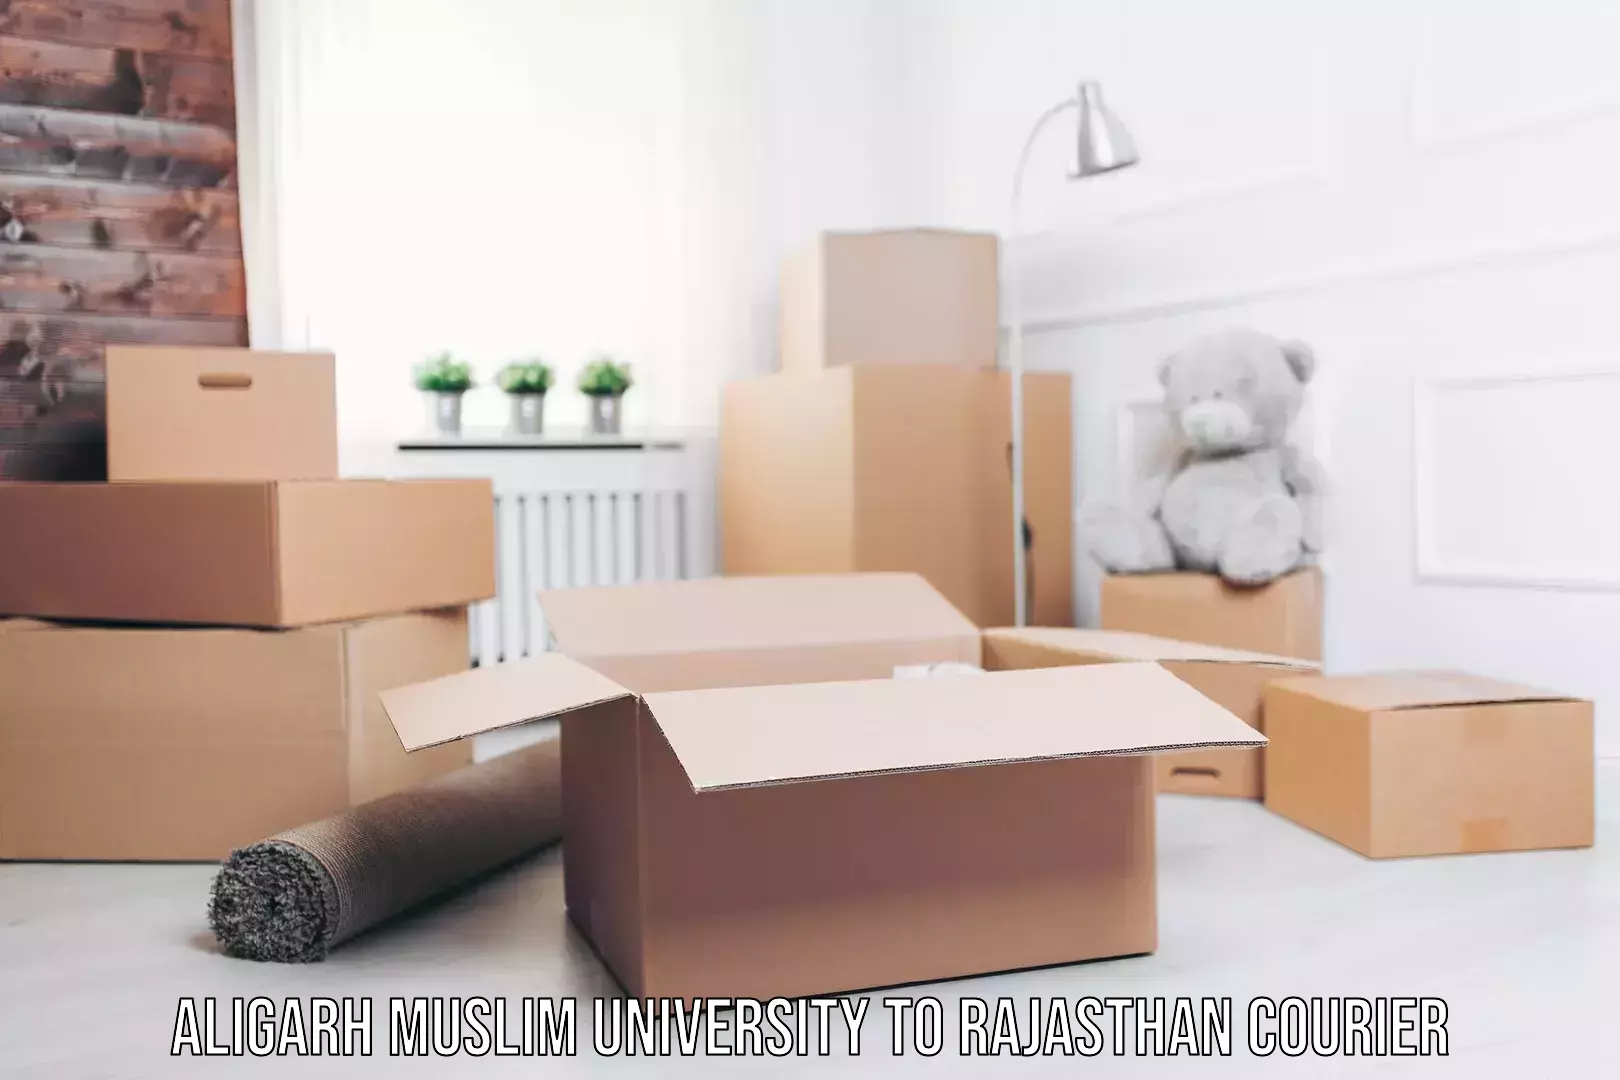 Courier services in Aligarh Muslim University to Rajasthan